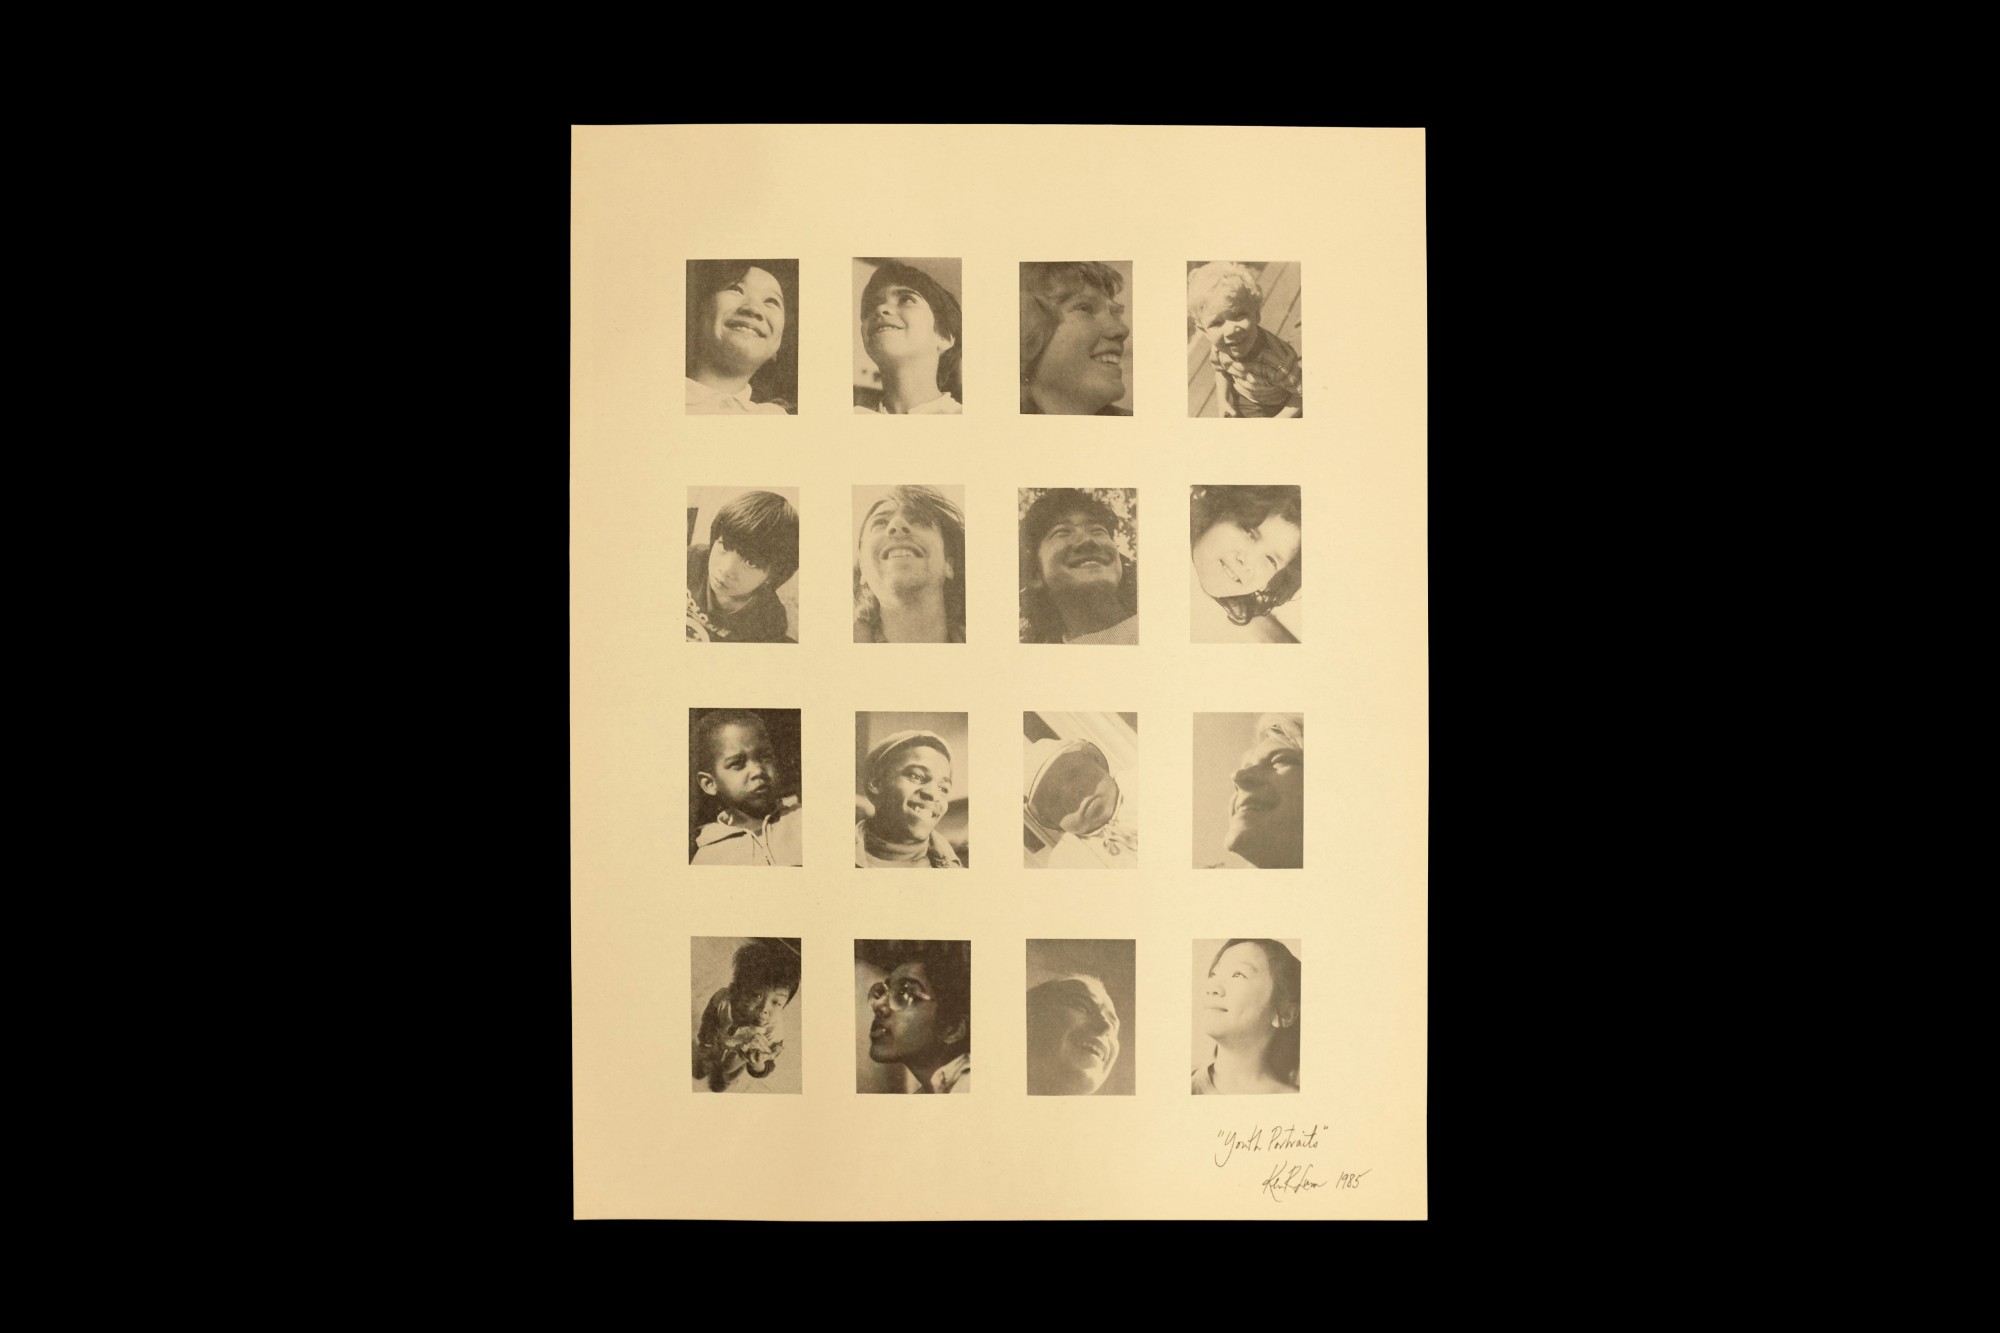 Image Description: An offset lithograph on newsprint presents a grid of 16 black and white photographic portraits; of diverse youth ranging in age from infants to young adults. Each portrait is closely cropped, where the portraits’ smiling faces gaze outward in various directions.